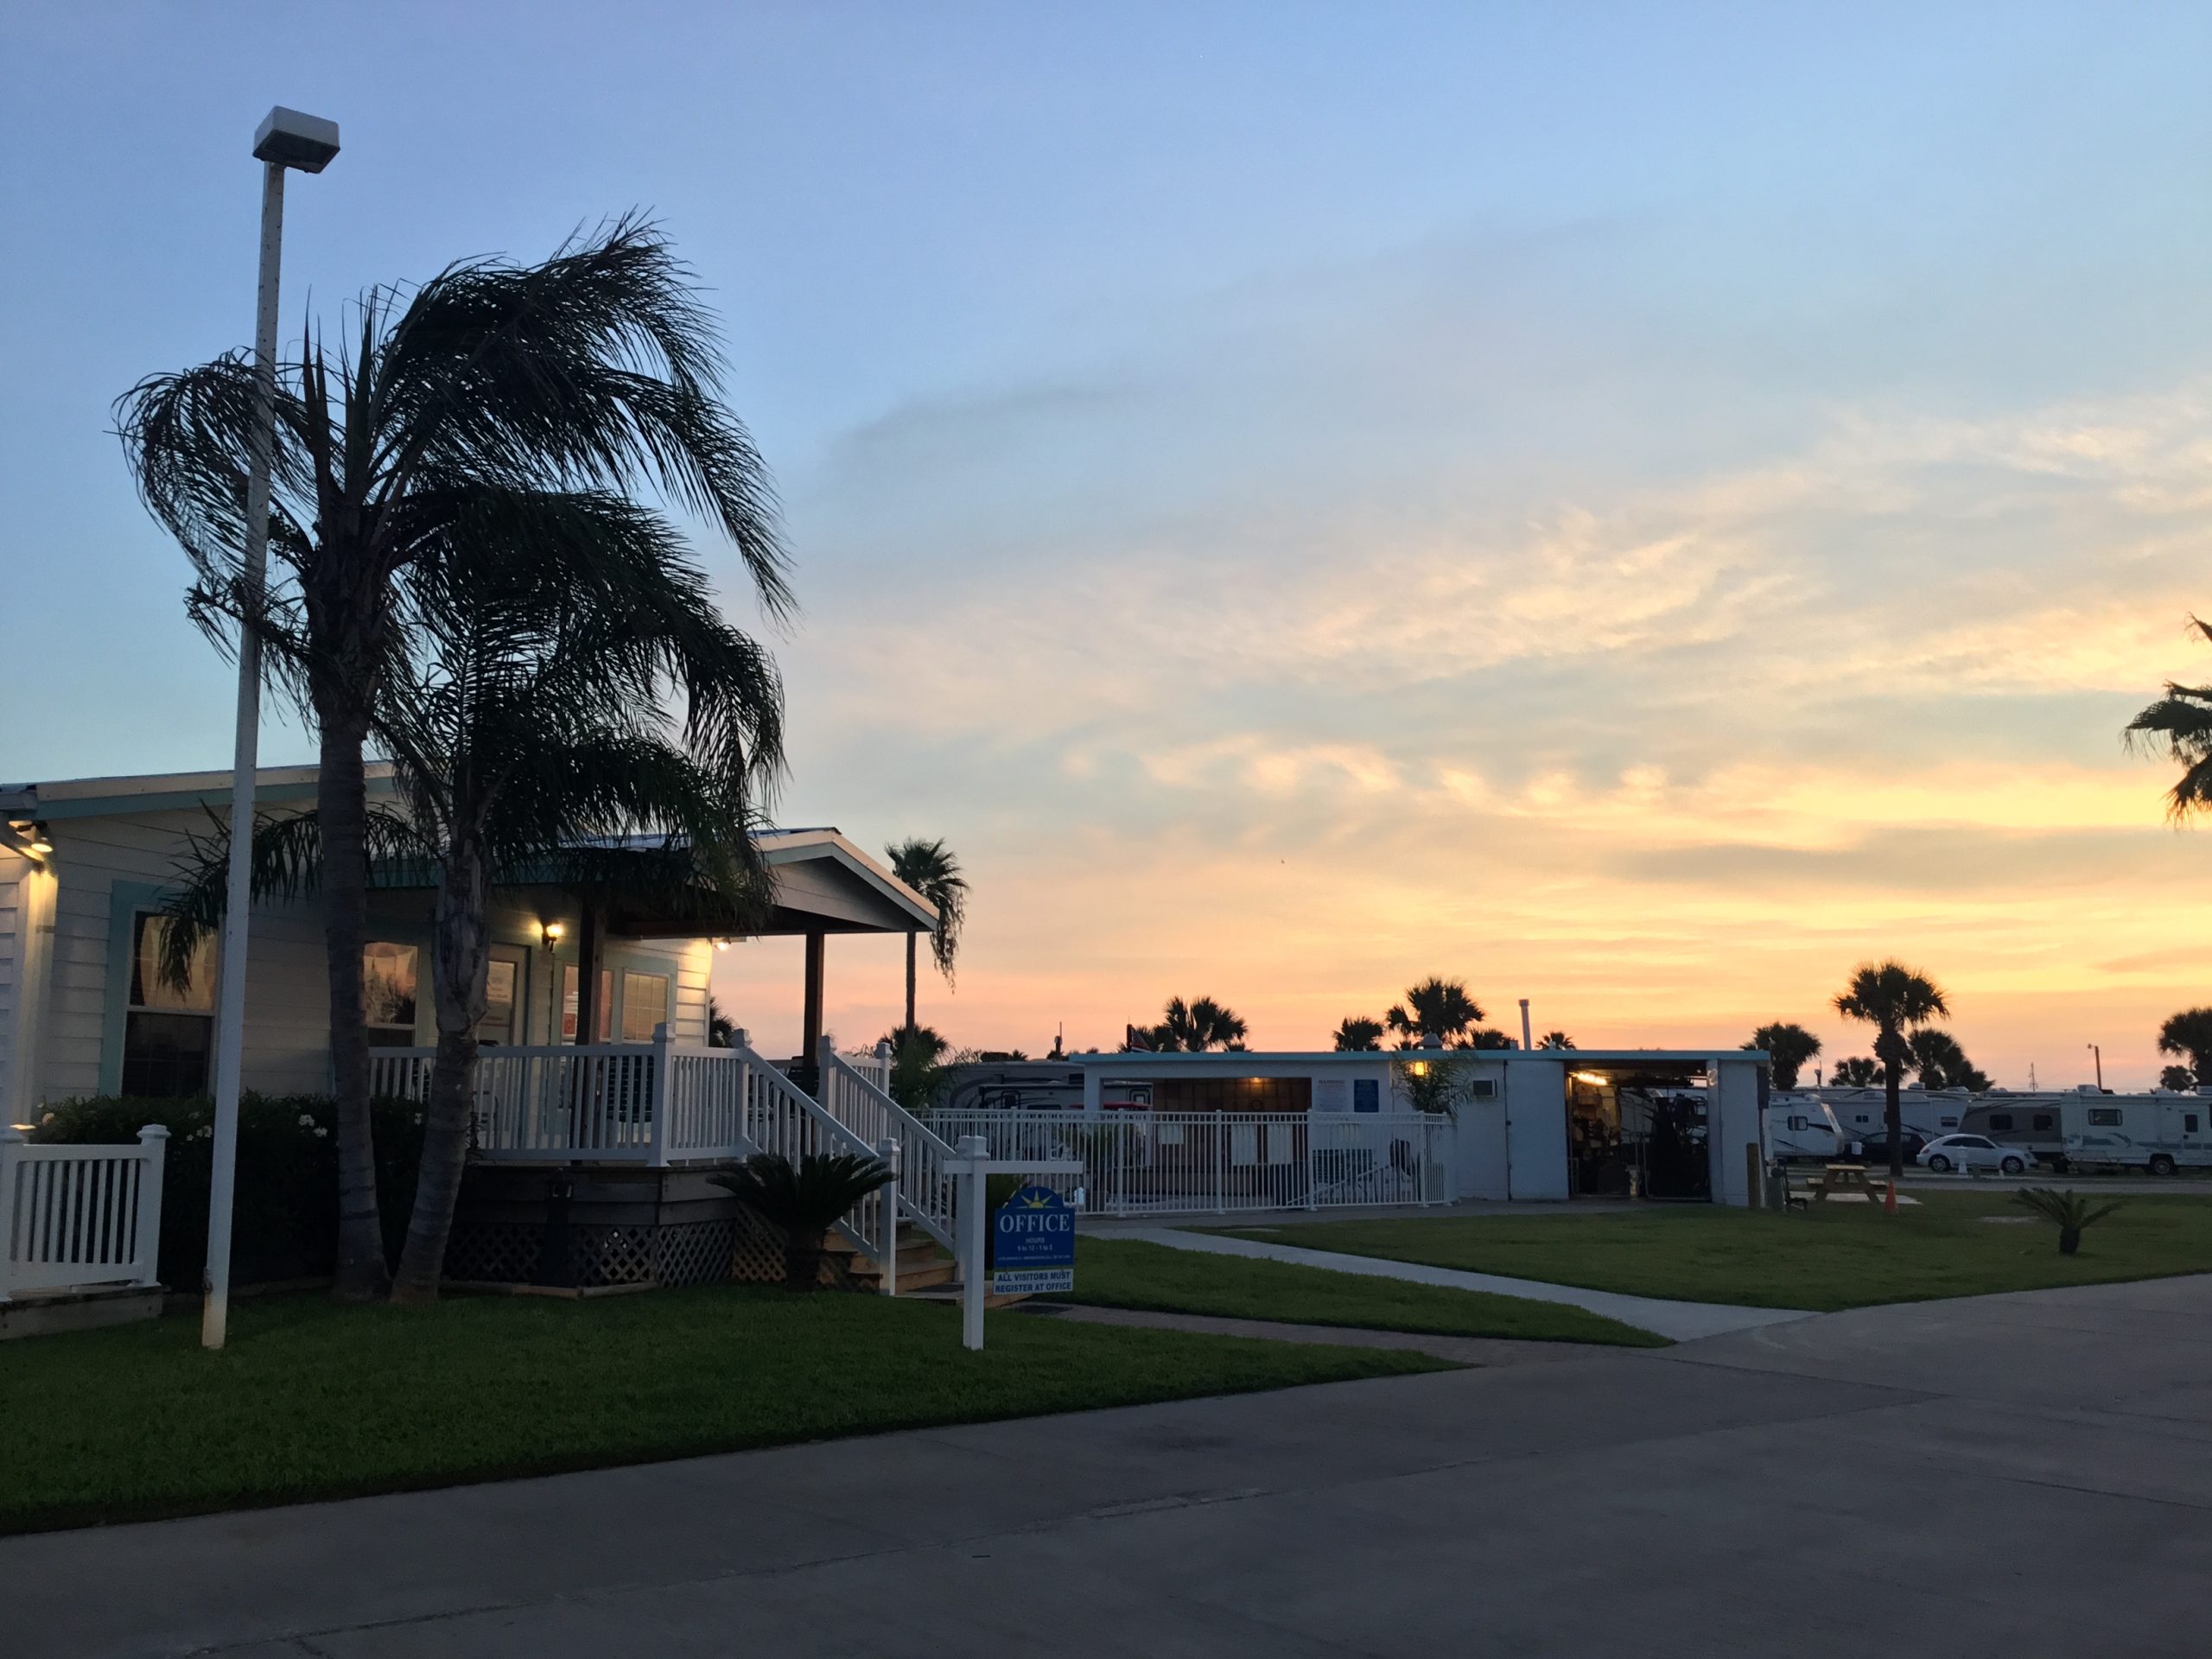 Sunset view of RV's parked at Island RV Resort in Texas